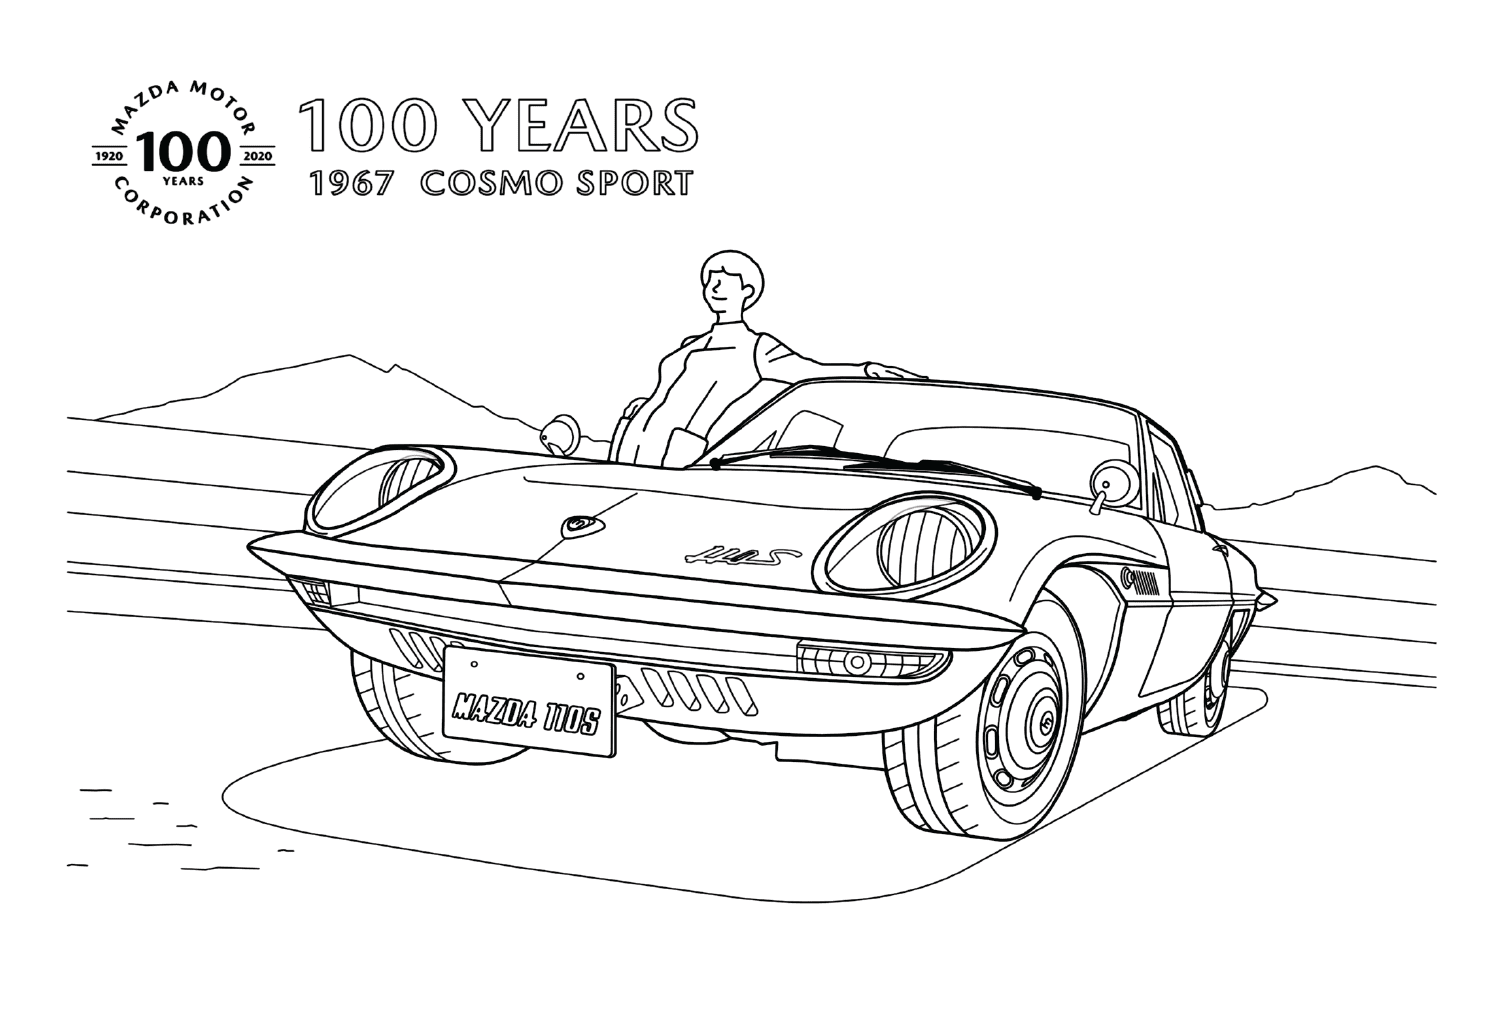 Mazda Cosmo Sport Coloring Page from Mazda